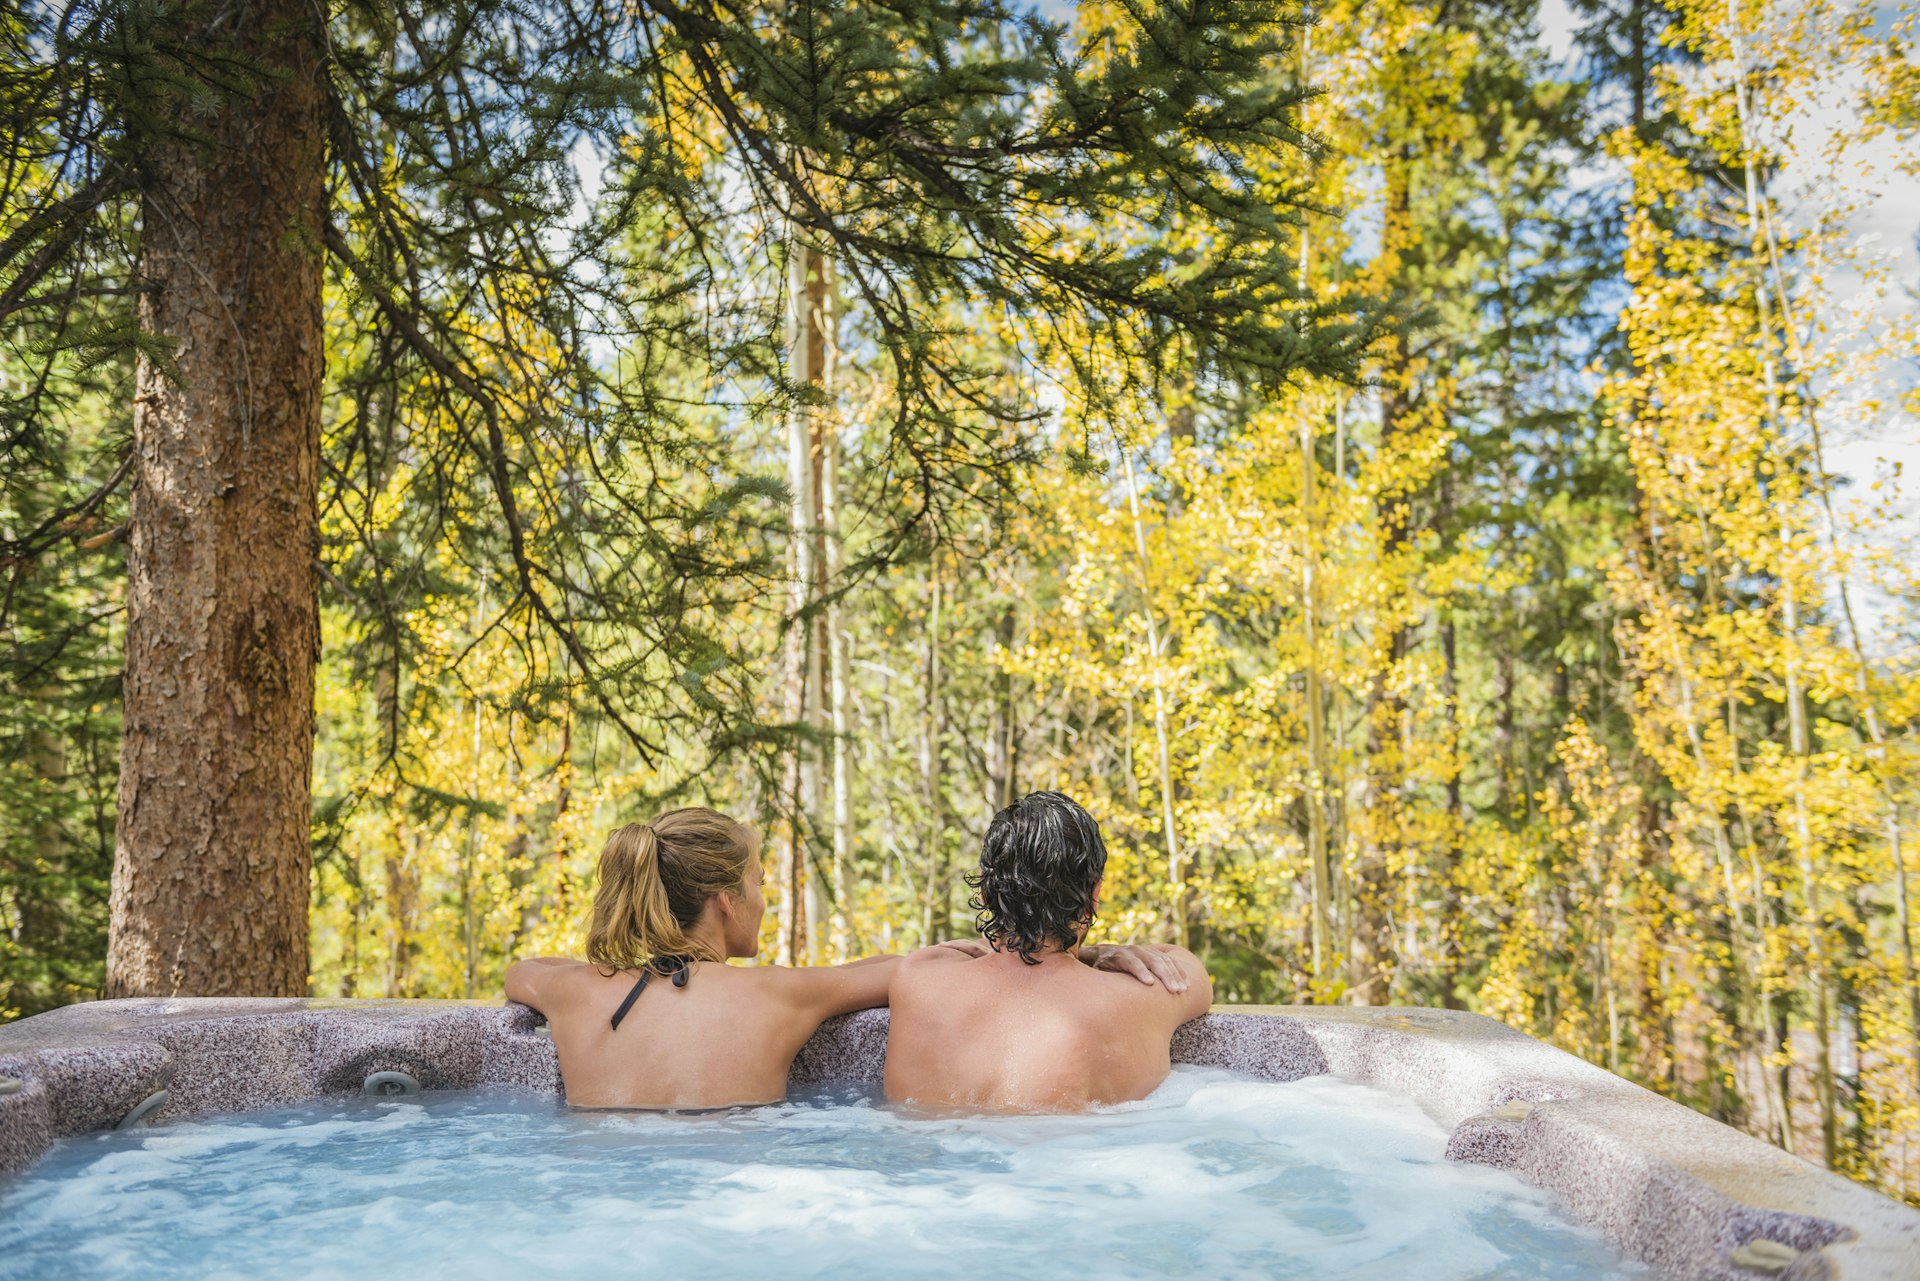 A woman and man in a hot tub looking at the fall foliage in Colorado